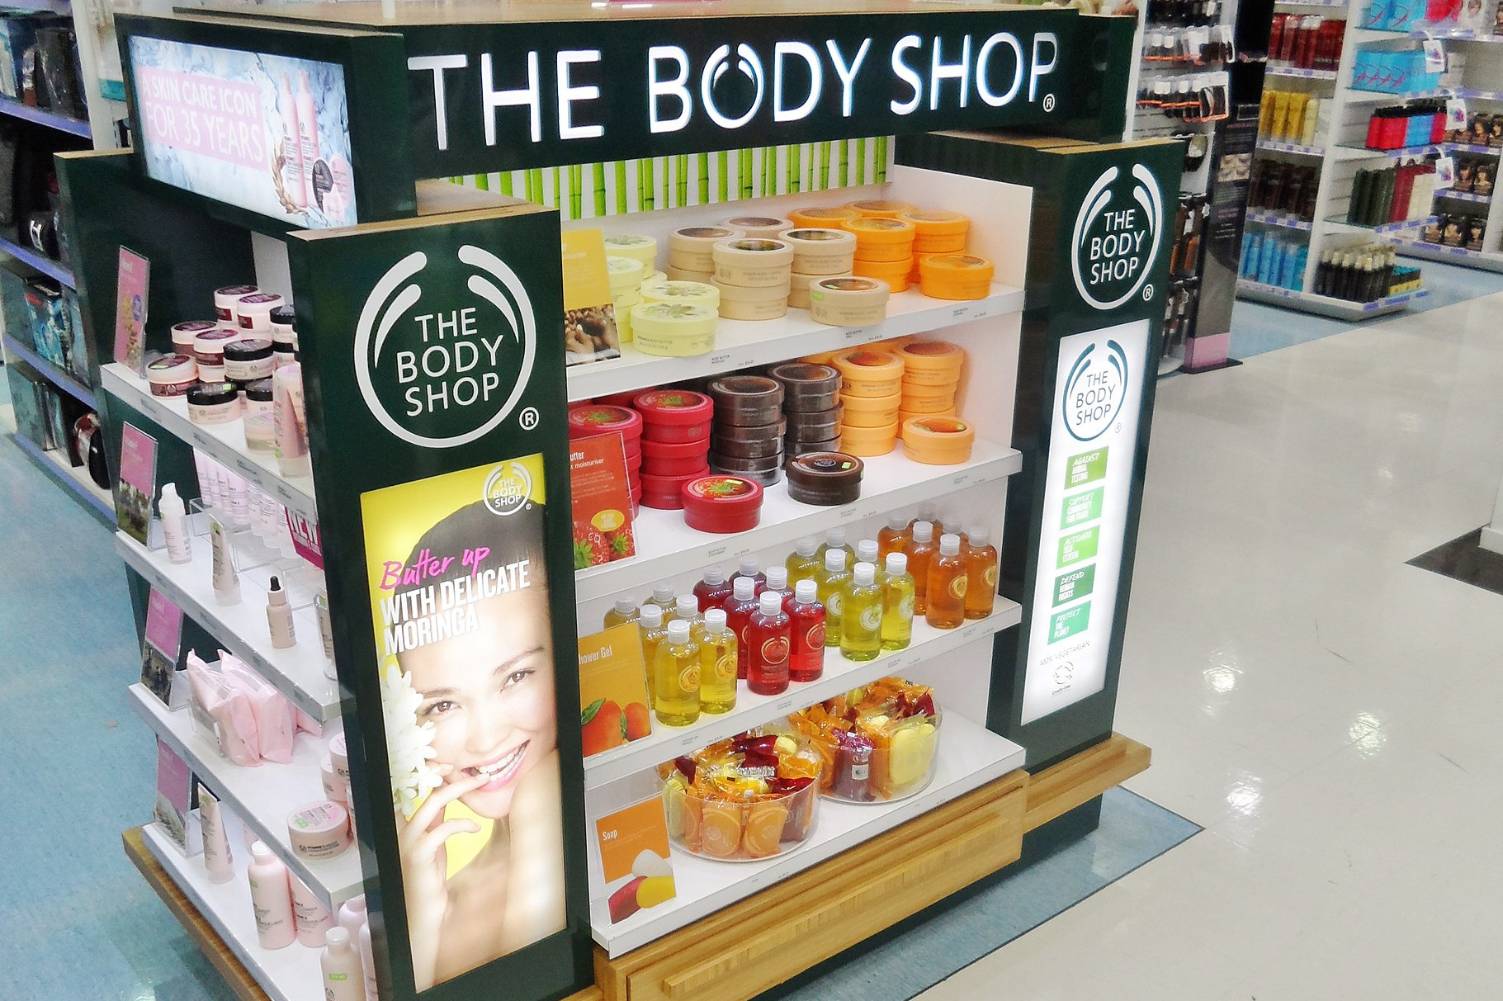 The Body Shop was the scent of my youth – and it’s young people who could resurrect the brand